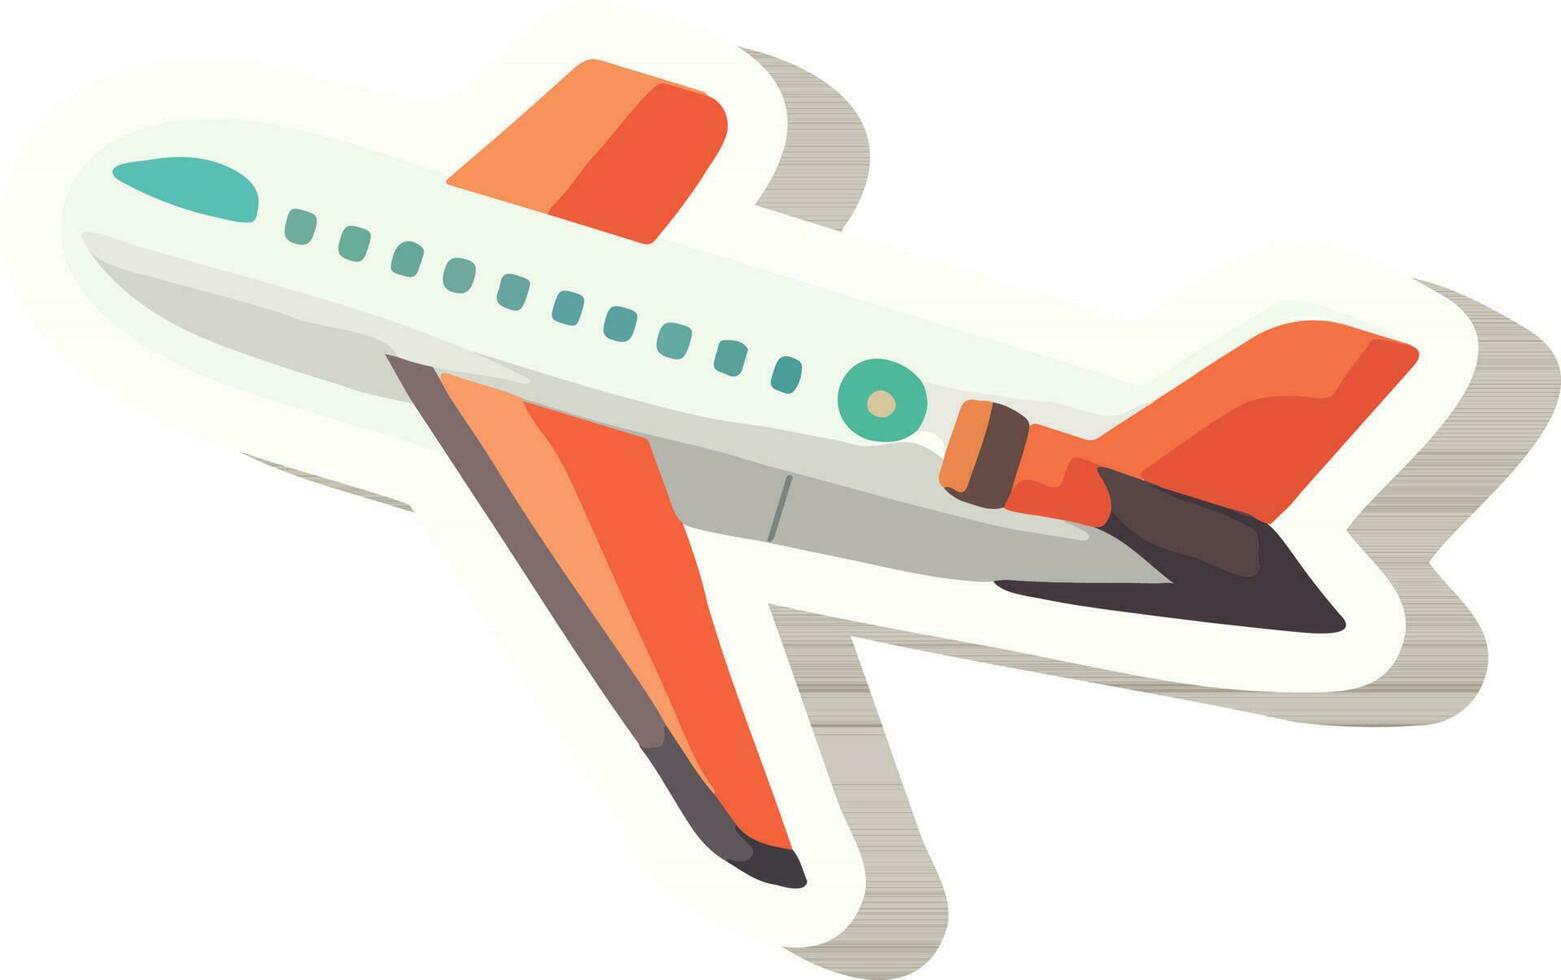 Sticker Style Airplane Icon In Orange And Gray Color. vector